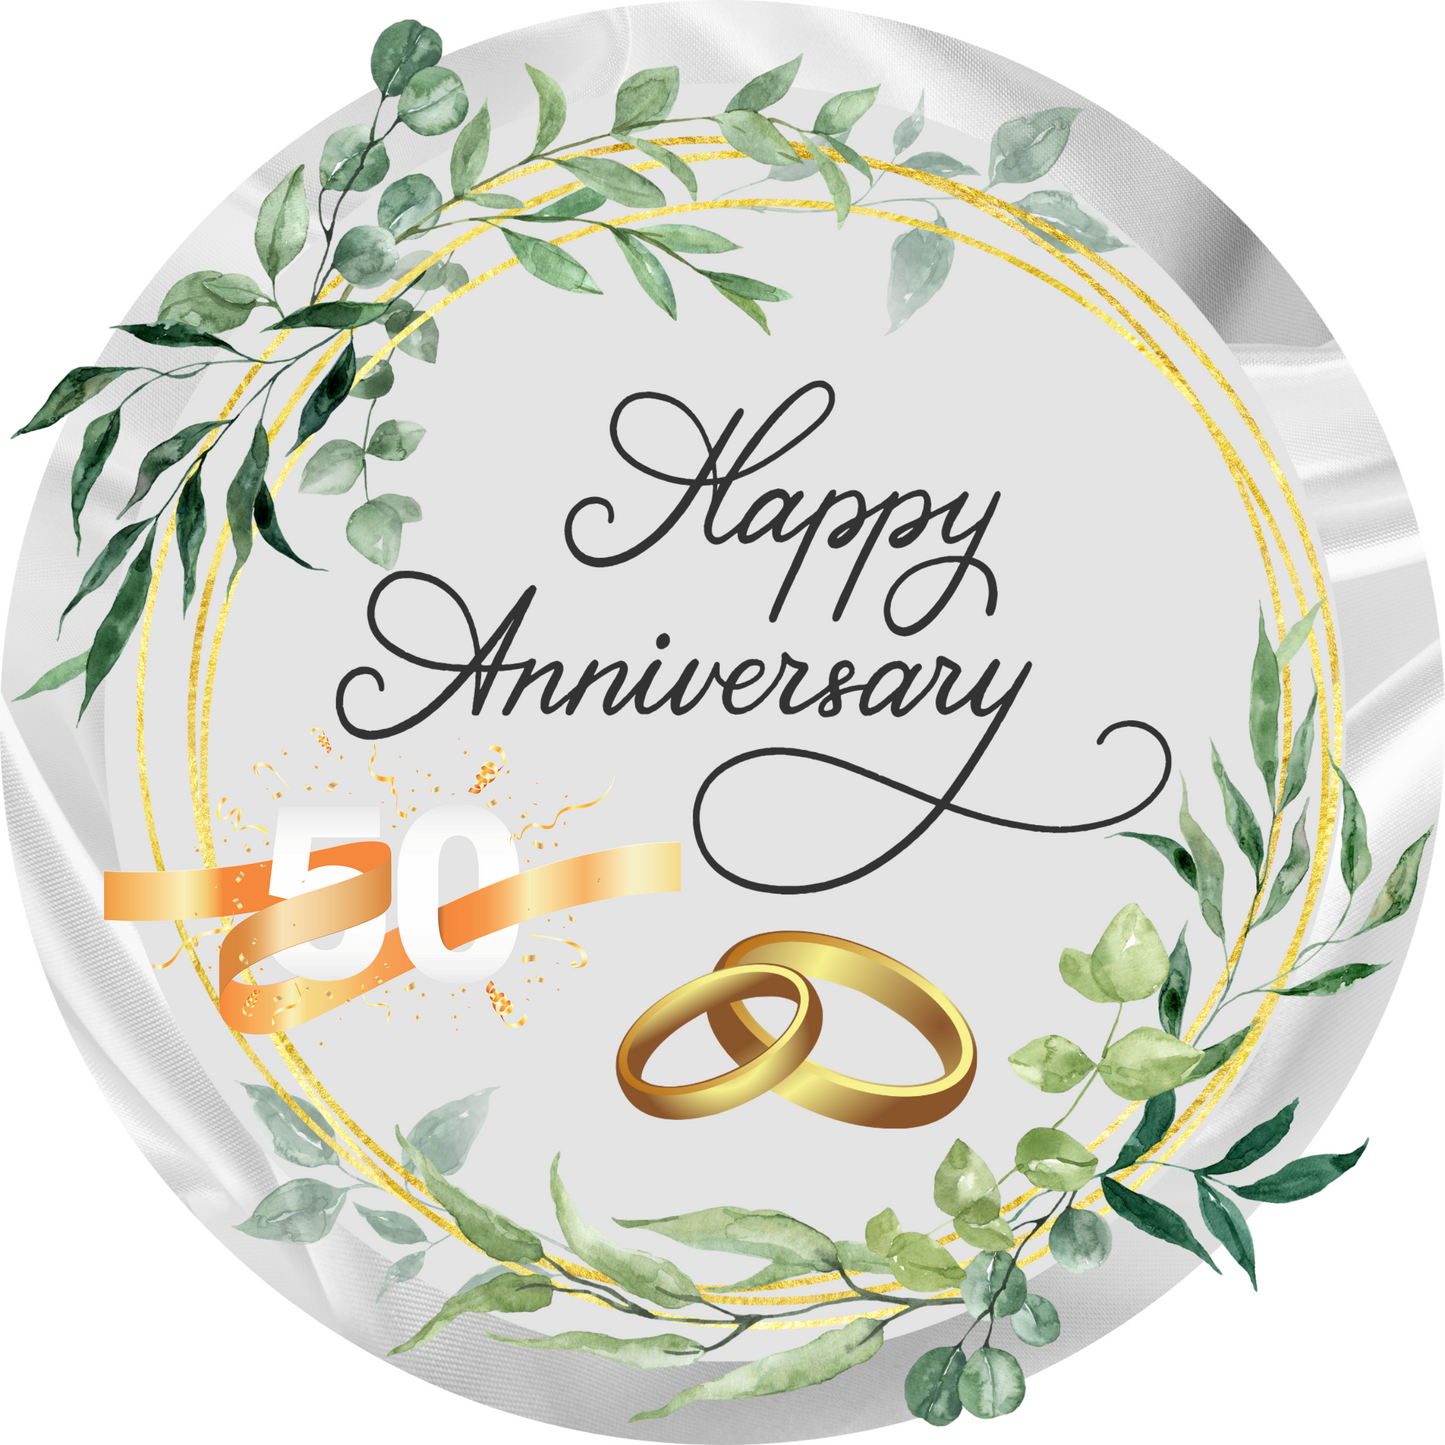 Happy 50th Anniversary with Rings Round- Silver and Gold with 50th ribbon